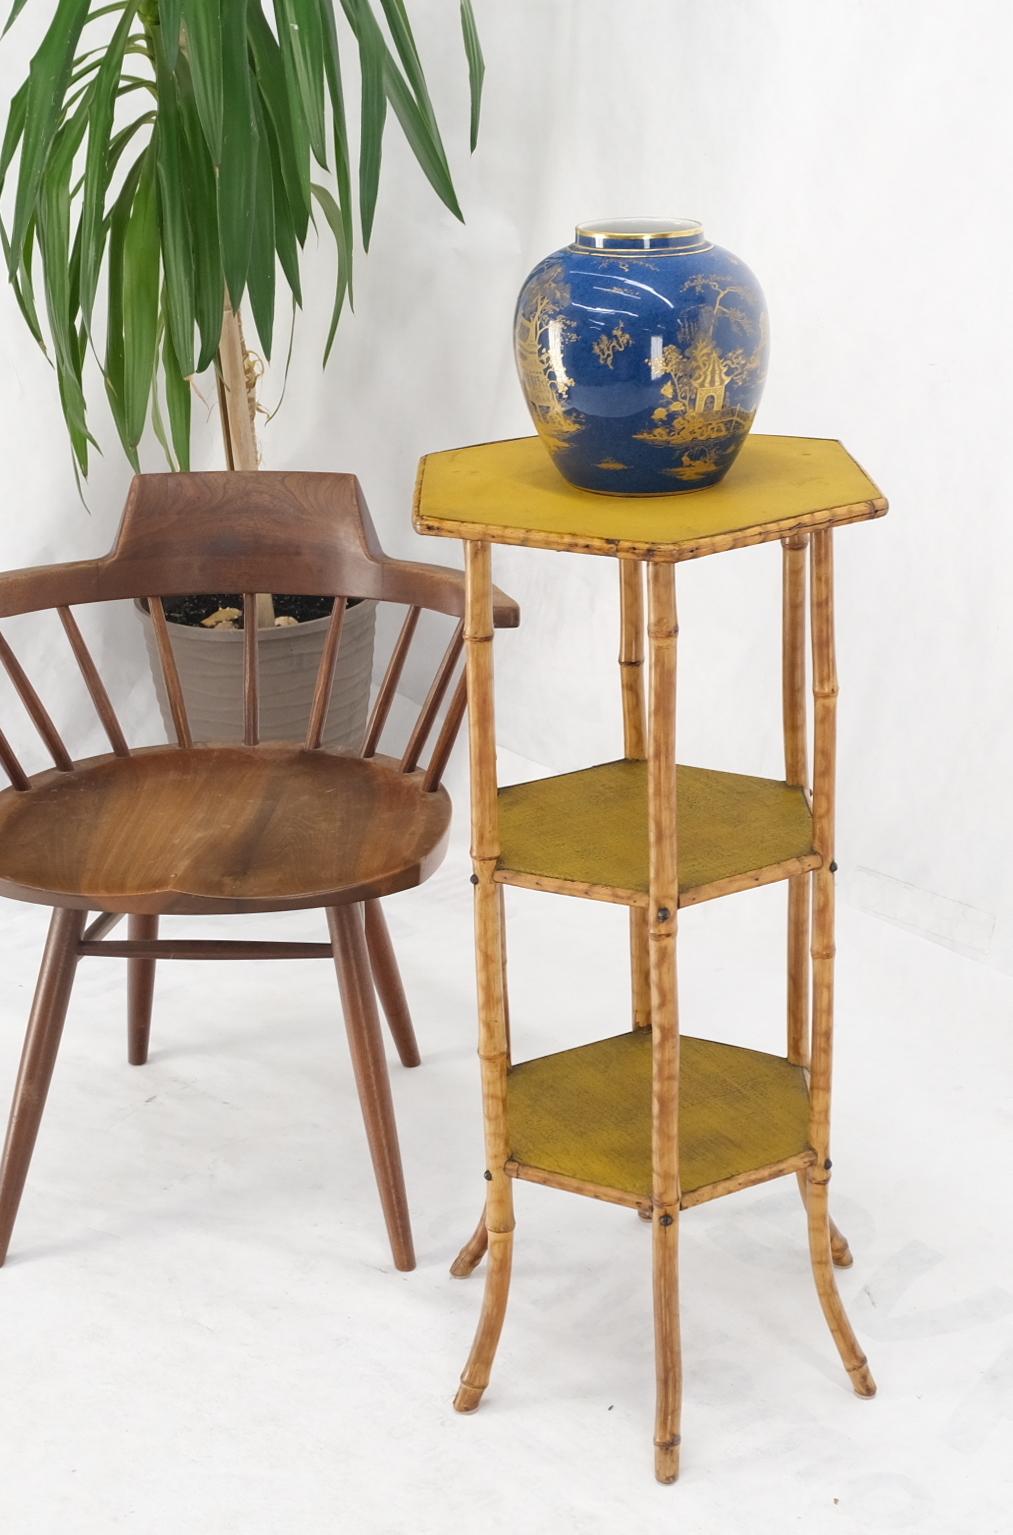 3 Tier grass cloth hexagon burnt bamboo antique pedestal candle lamp table stand.